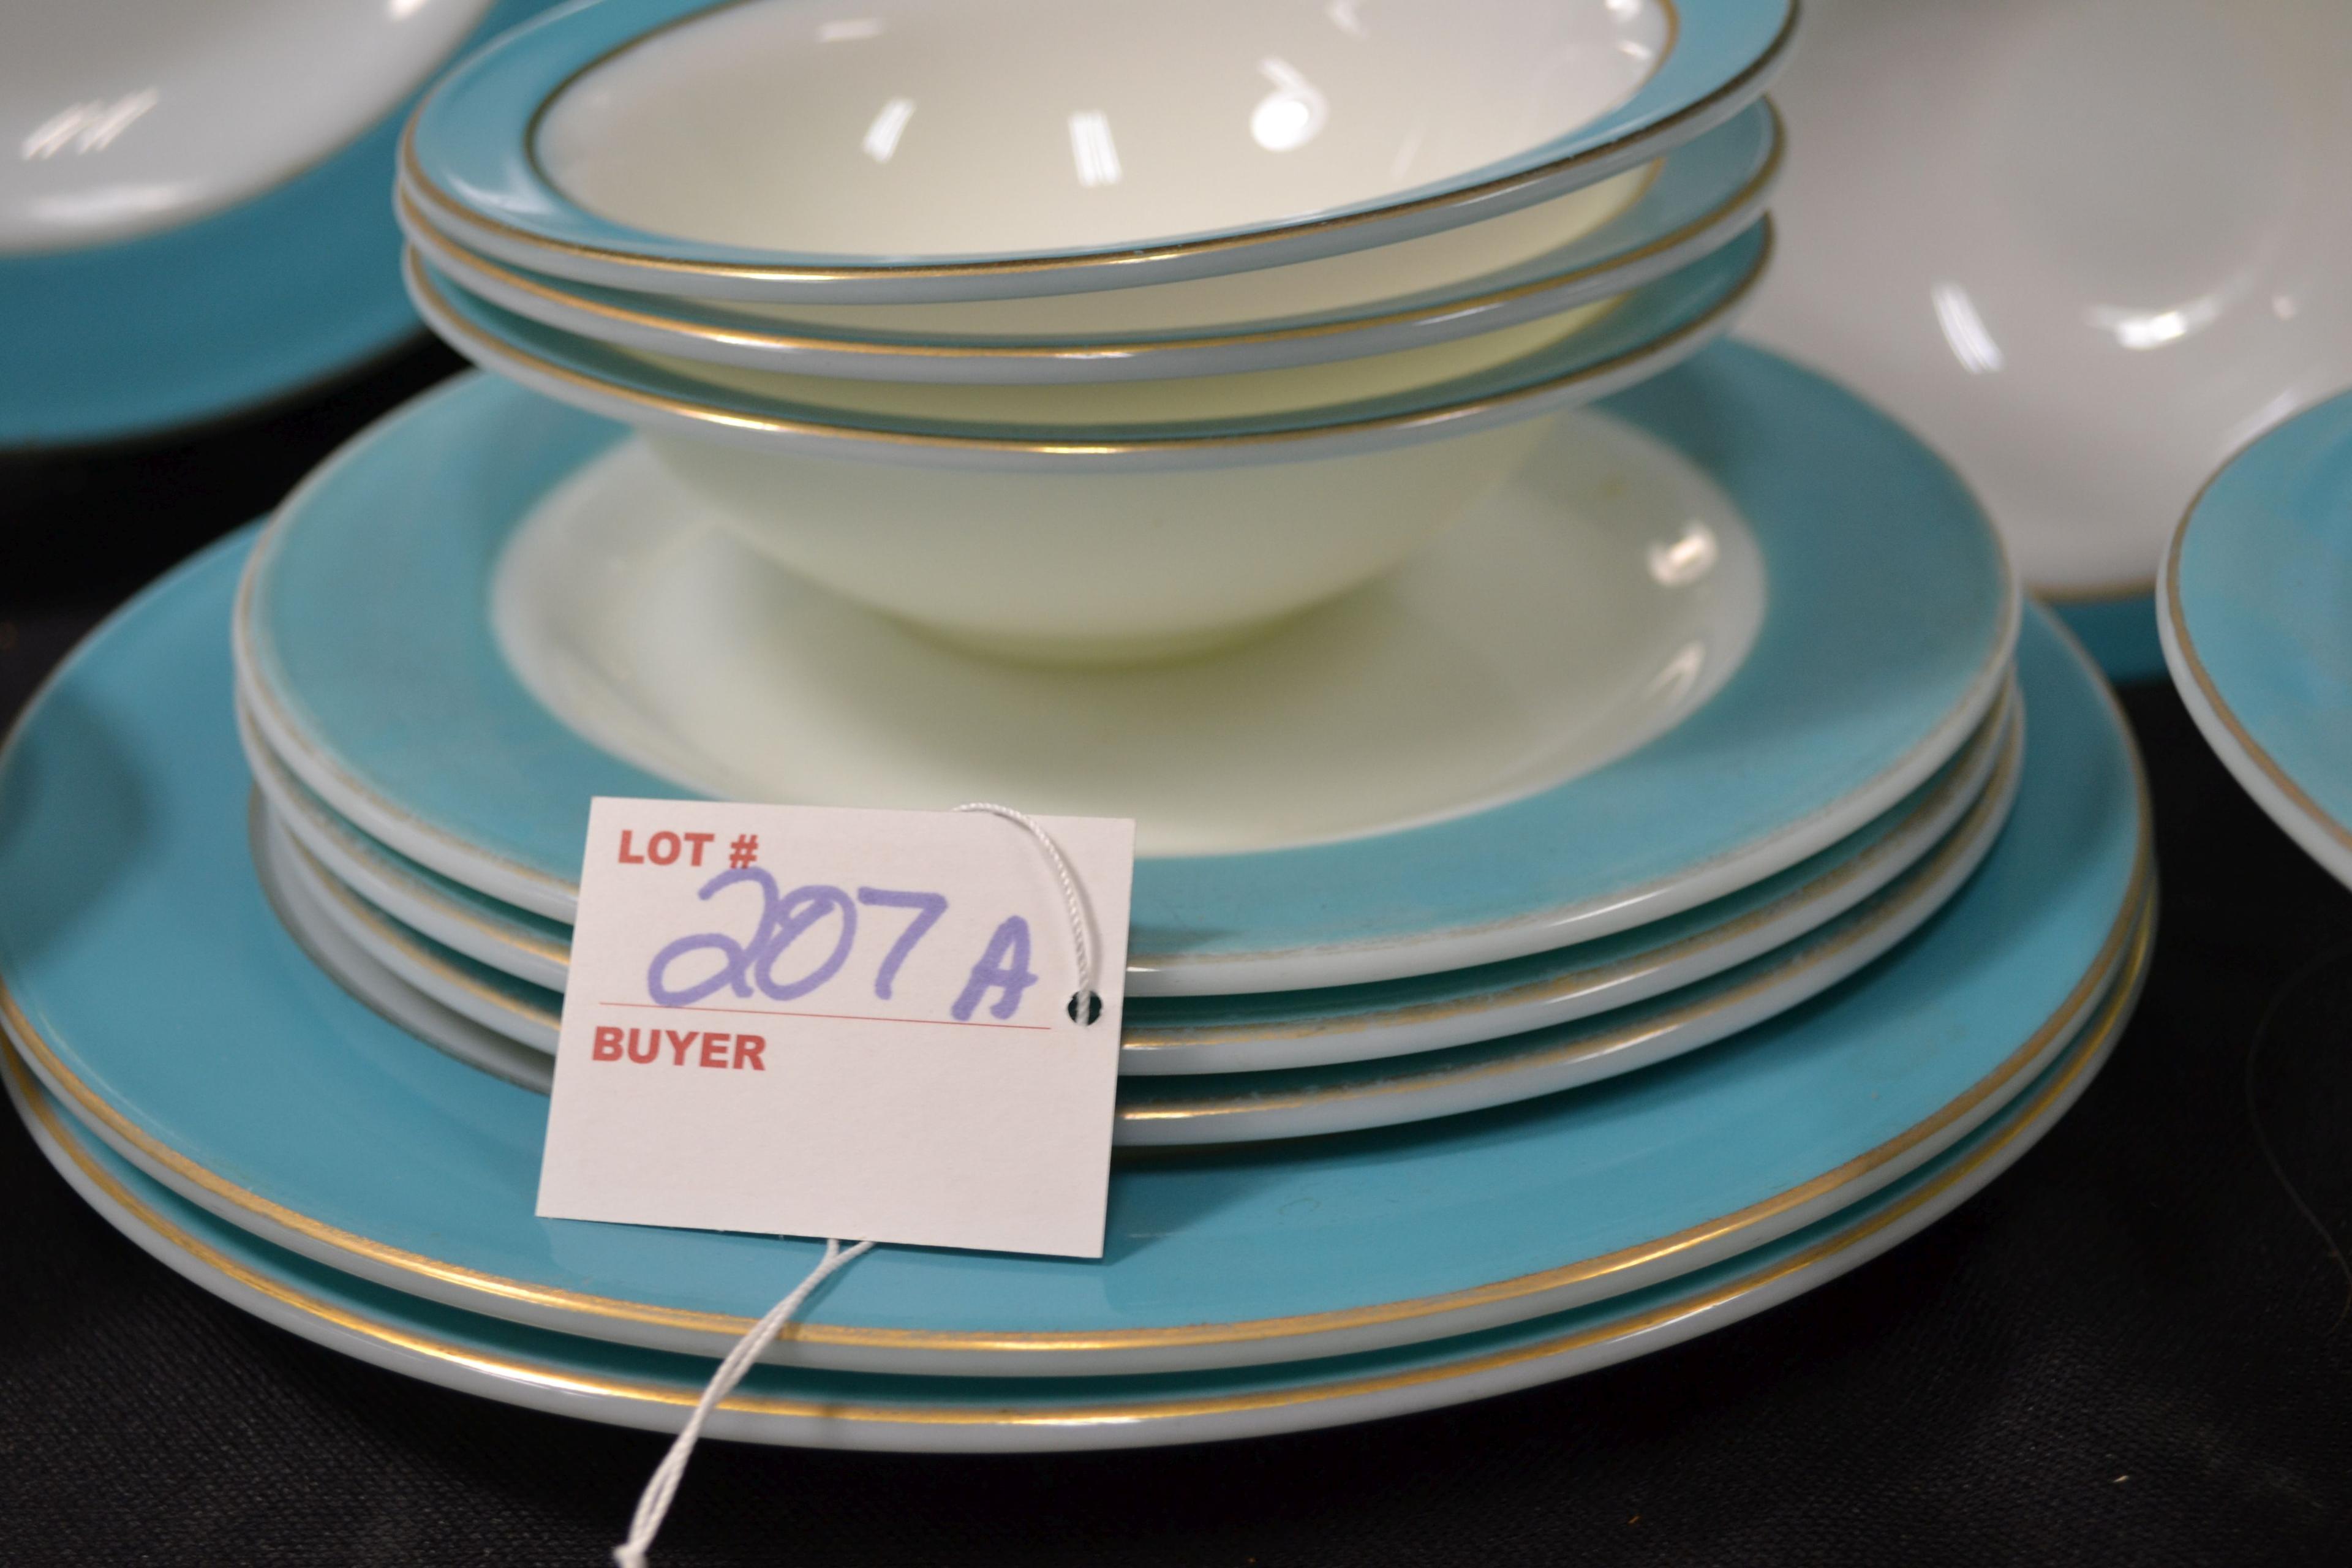 Pyrex 4 Place Setting Turquoise Dinnerware including 4 Dinner Plates, 4 Dessert Plates, 4 Bowls, 4 C